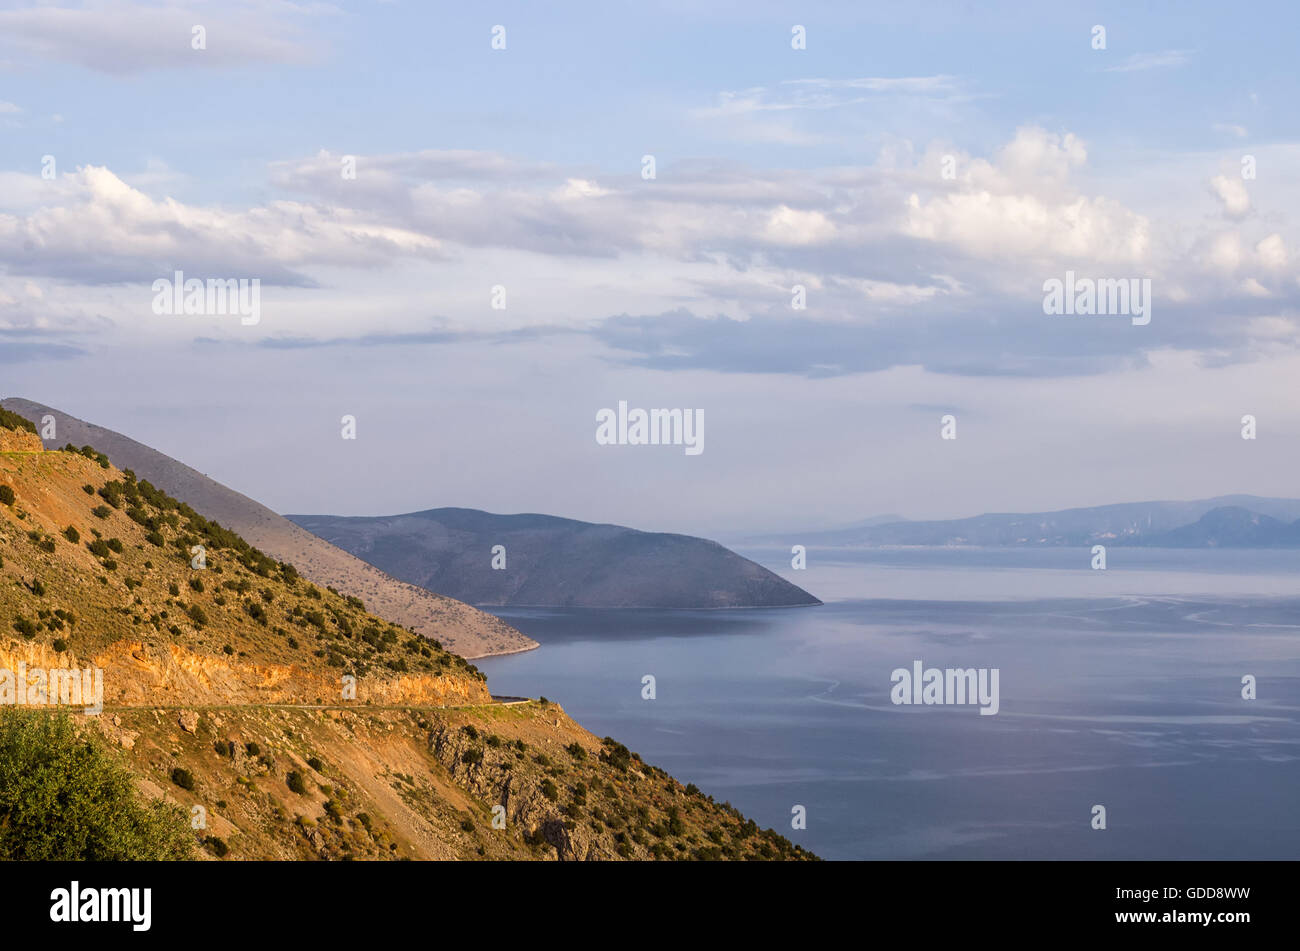 Amazing view from the top of a mountain down to the sea, close to Itea, Greece, at dusk Stock Photo